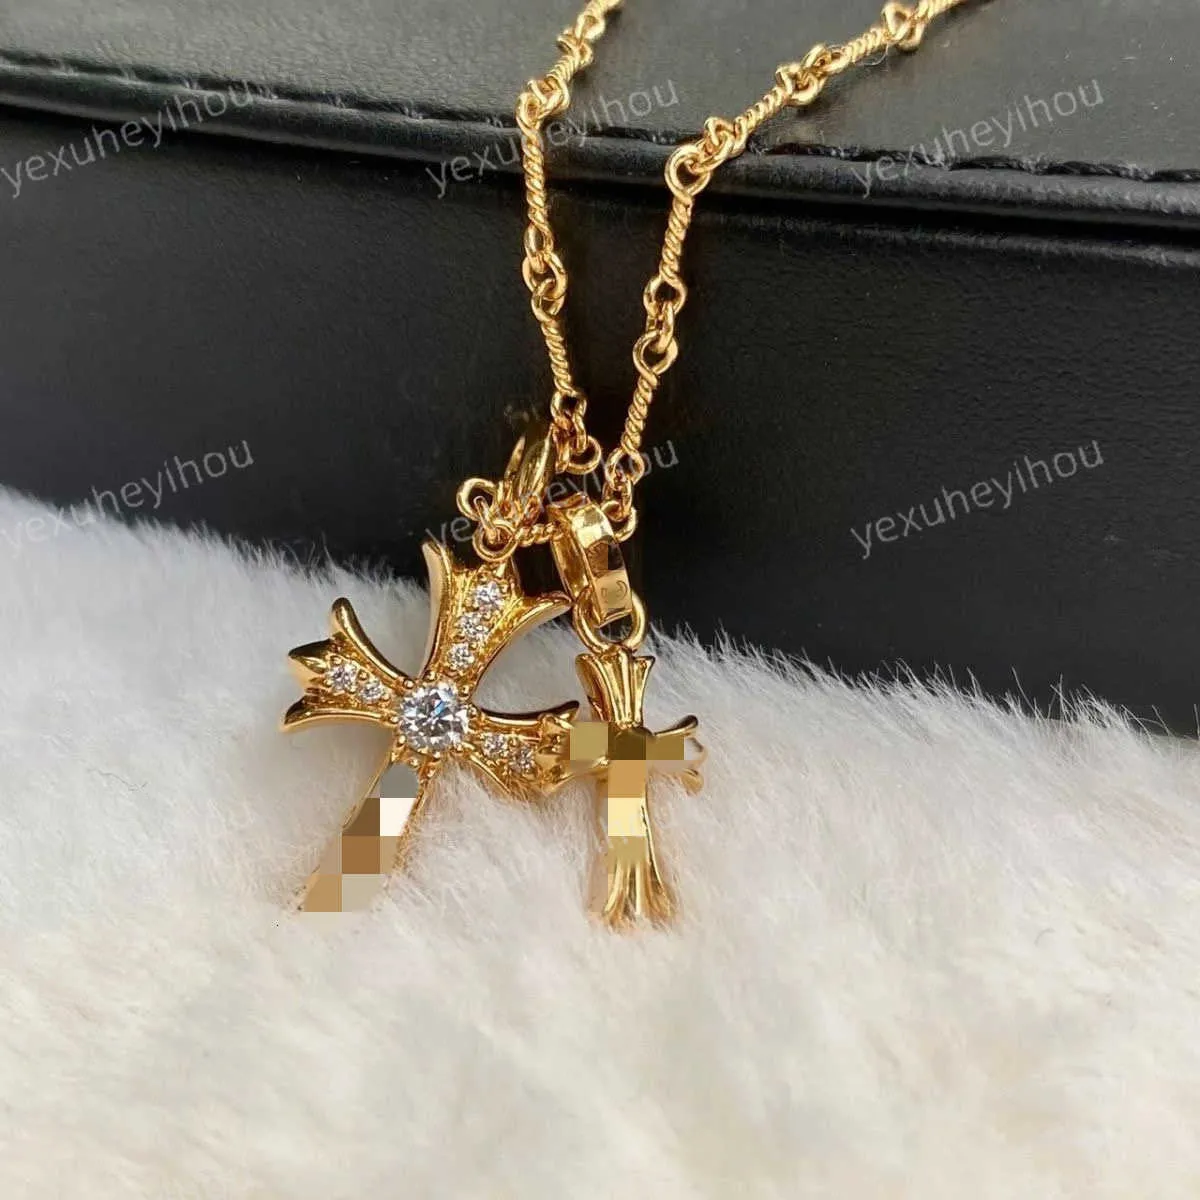 T GG Jewelry Designer Necklace Double Layer Cross CH Necklace Womens American Light Luxury Design High Sense Mens Long Sweater Chain Chromees Necklace hearts Neck